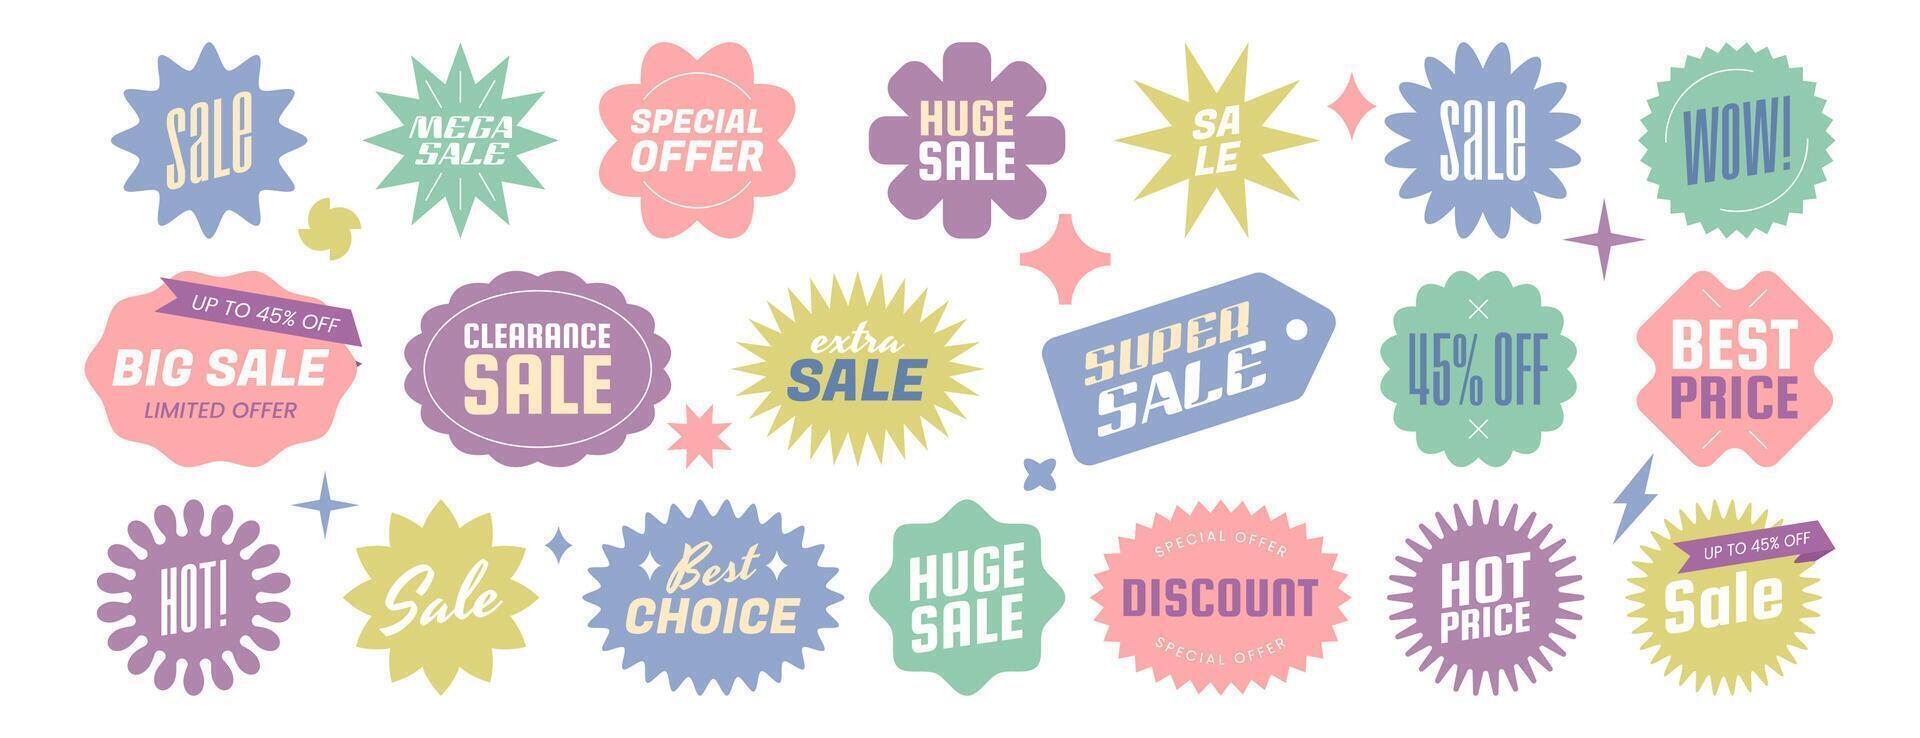 Pastel colored sunburst badges, price stickers callout different shapes. Starburst sale labels, promo tags, discount or special offer design elements. Vector set of emblem or stamp for retail sales